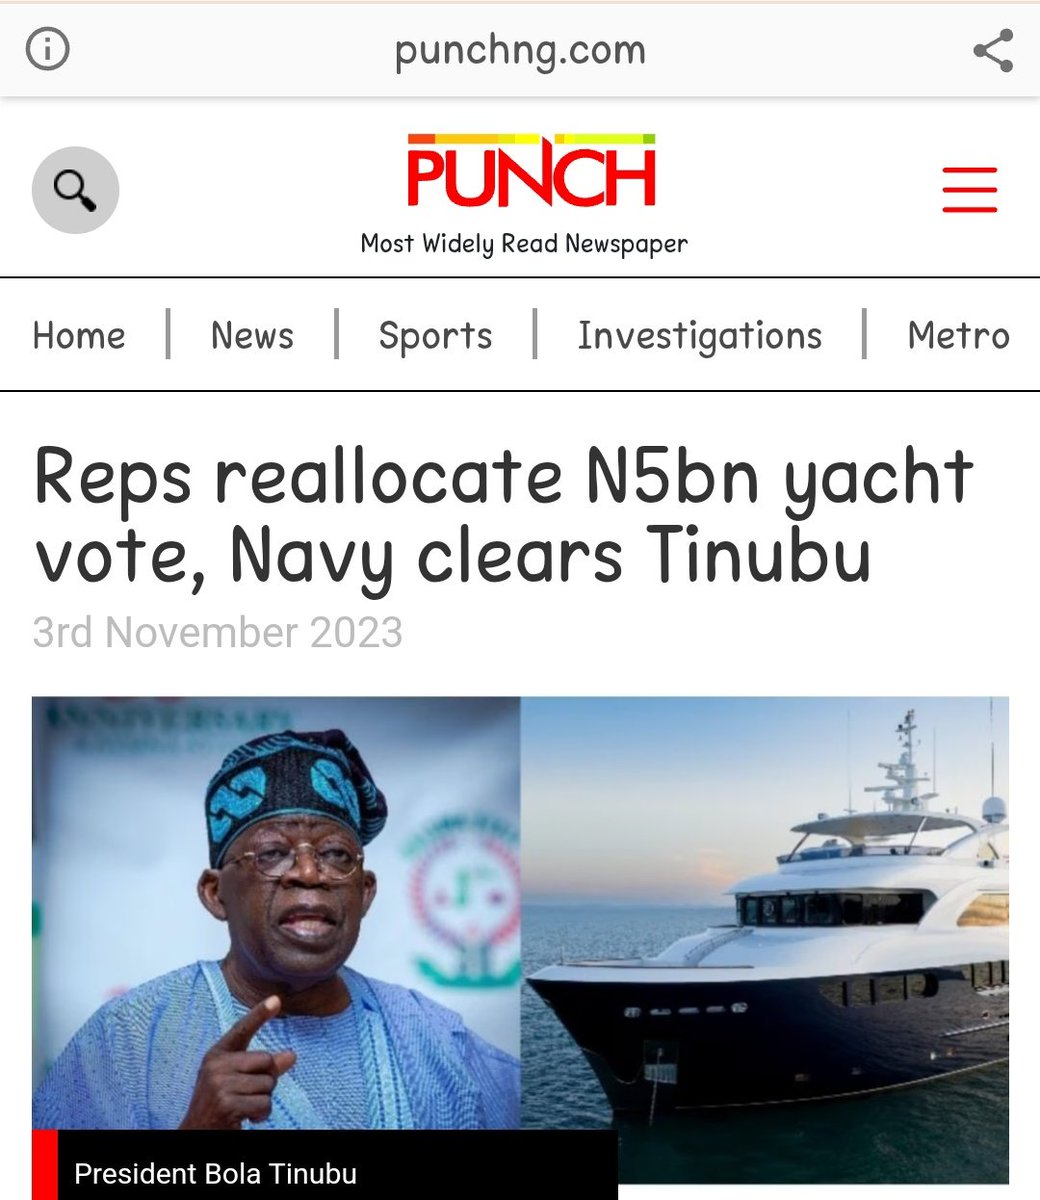 Tinubu came to office, settles himself with a yacht, nice car for first lady.

Lawmakers wanted to shout, he shüt their møuths with brand new SUVs...

Settles VP and chief of staff with humongous allocations to renovate their wings...

The rest is TAX, TAX, TAX! 
#TinubuMustGo